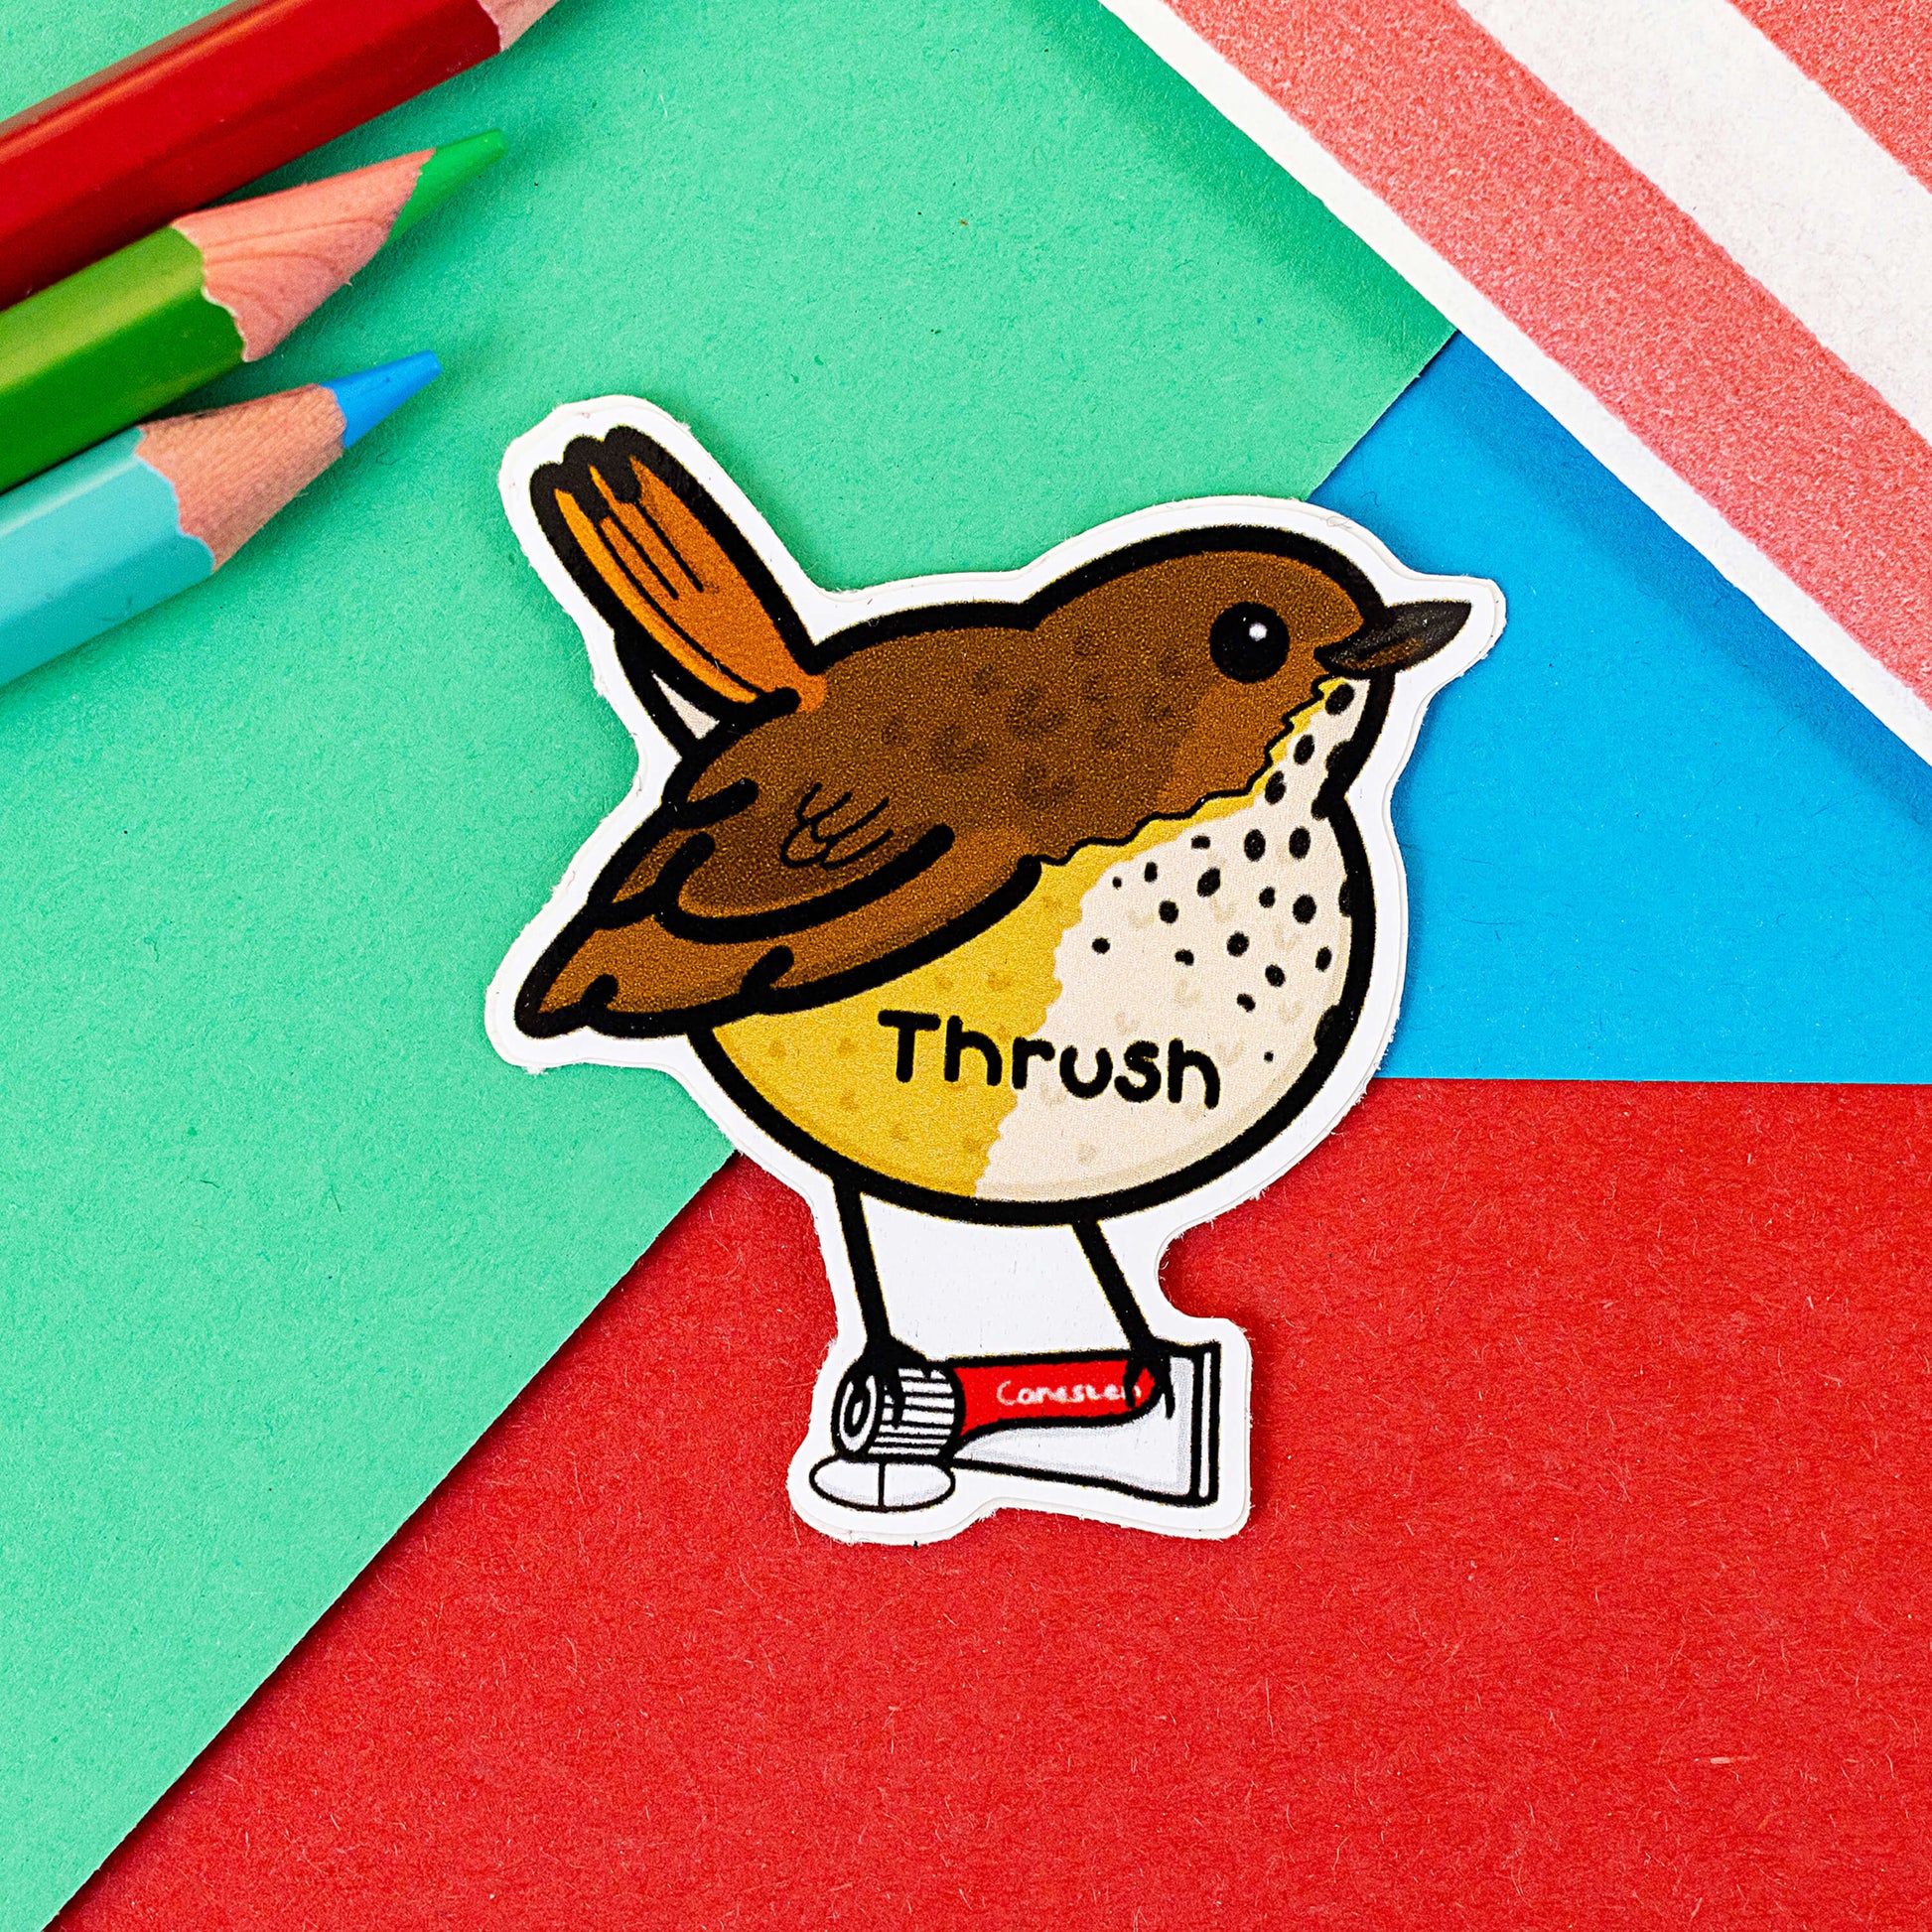 The Thrush Bird Sticker on a red, blue and green background with colouring pencils and red stripe candy bag. The brown thrush bird is stood smiling on a tube of thrush canesten cream and tablet, across its middle in black text reads 'thrush'. The hand drawn design is raising awareness for thrush.